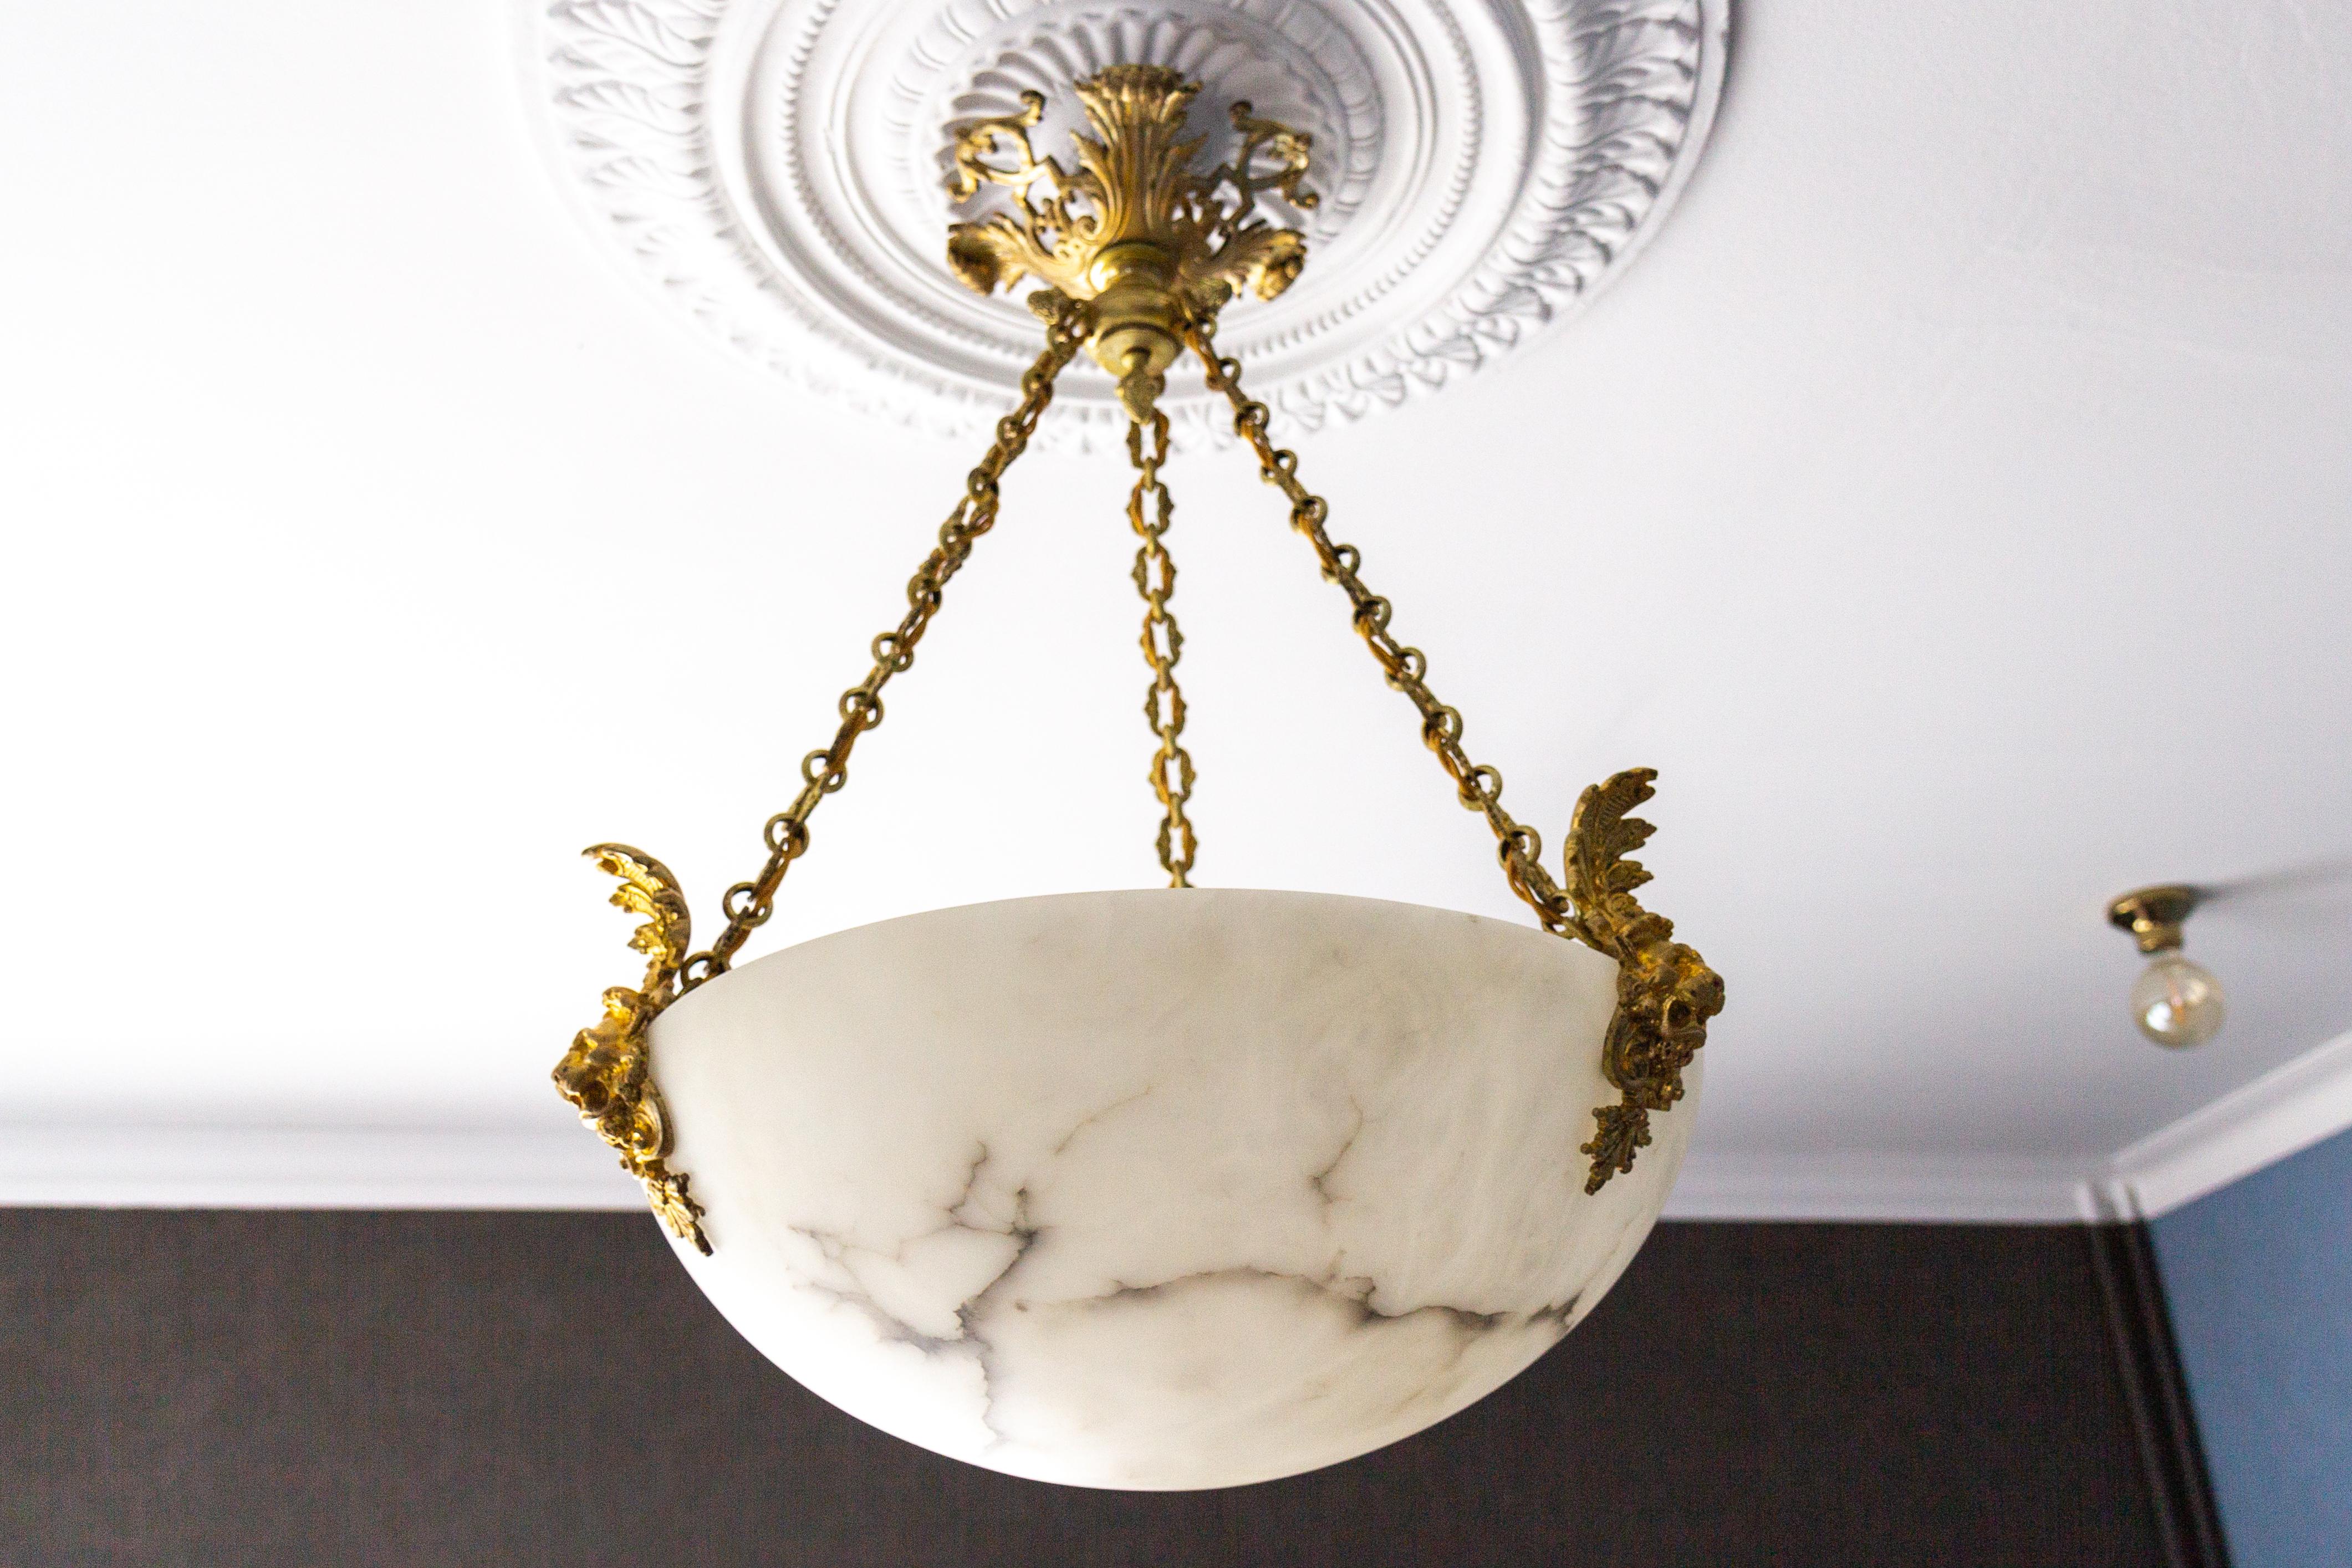 Antique and large three-light white alabaster and bronze pendant chandelier from circa 1900.
An impressive French pendant light featuring a white alabaster shade with gray and black veining. The elegant lampshade, a moon-like bowl is suspended from